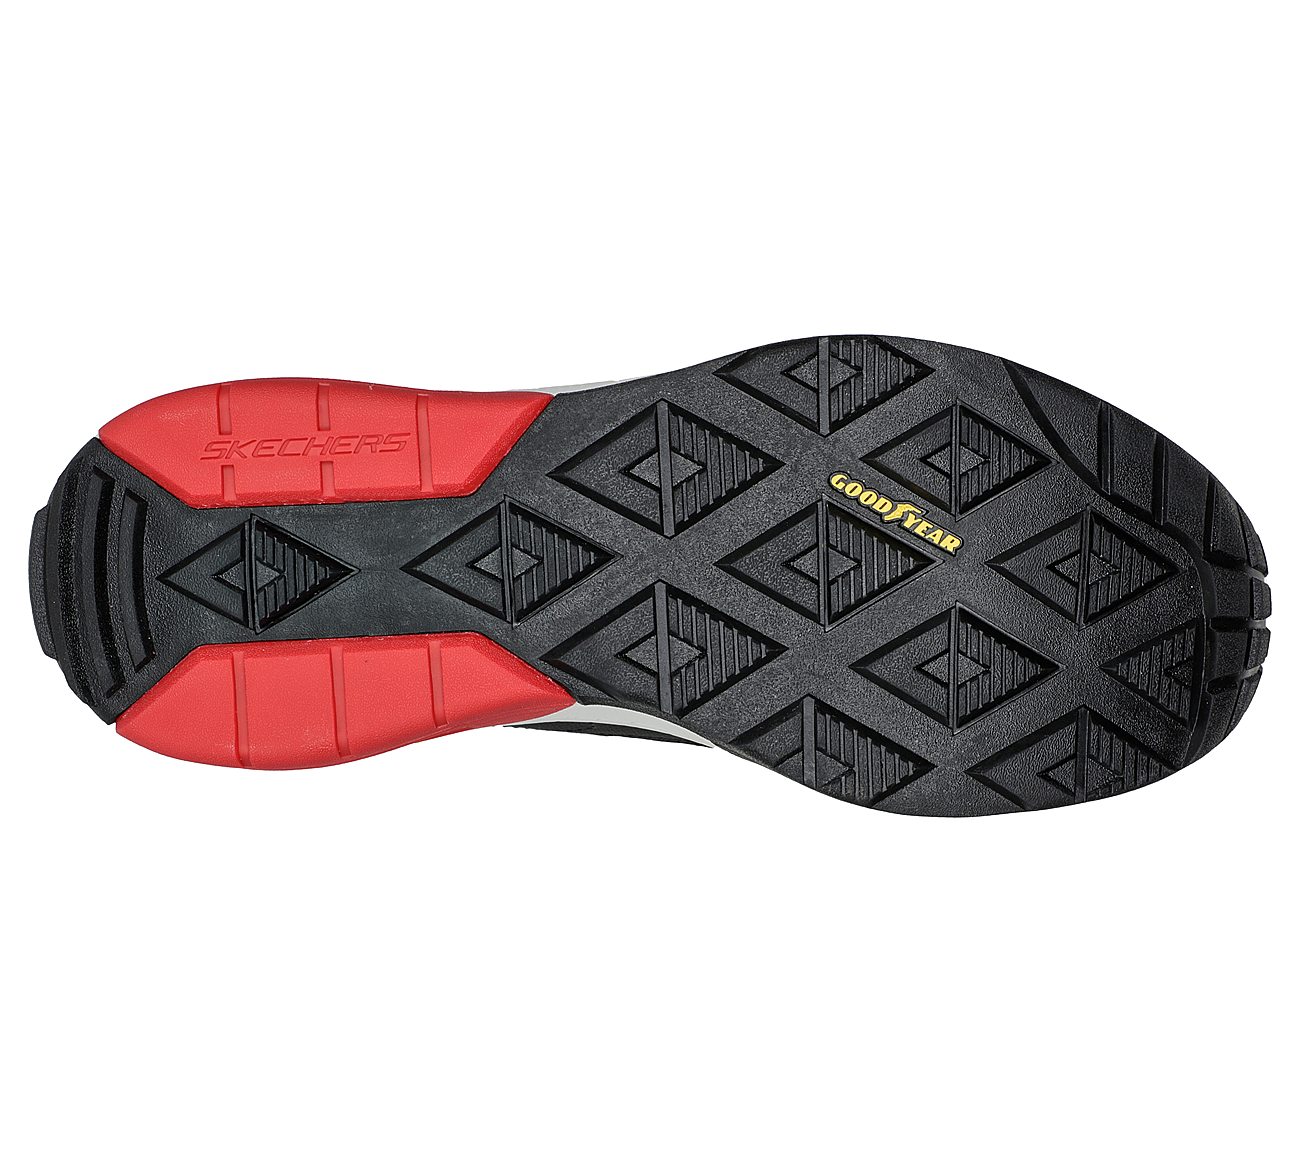 SKECH-AIR EXTREME V2, WWHITE/BLACK/RED Footwear Bottom View